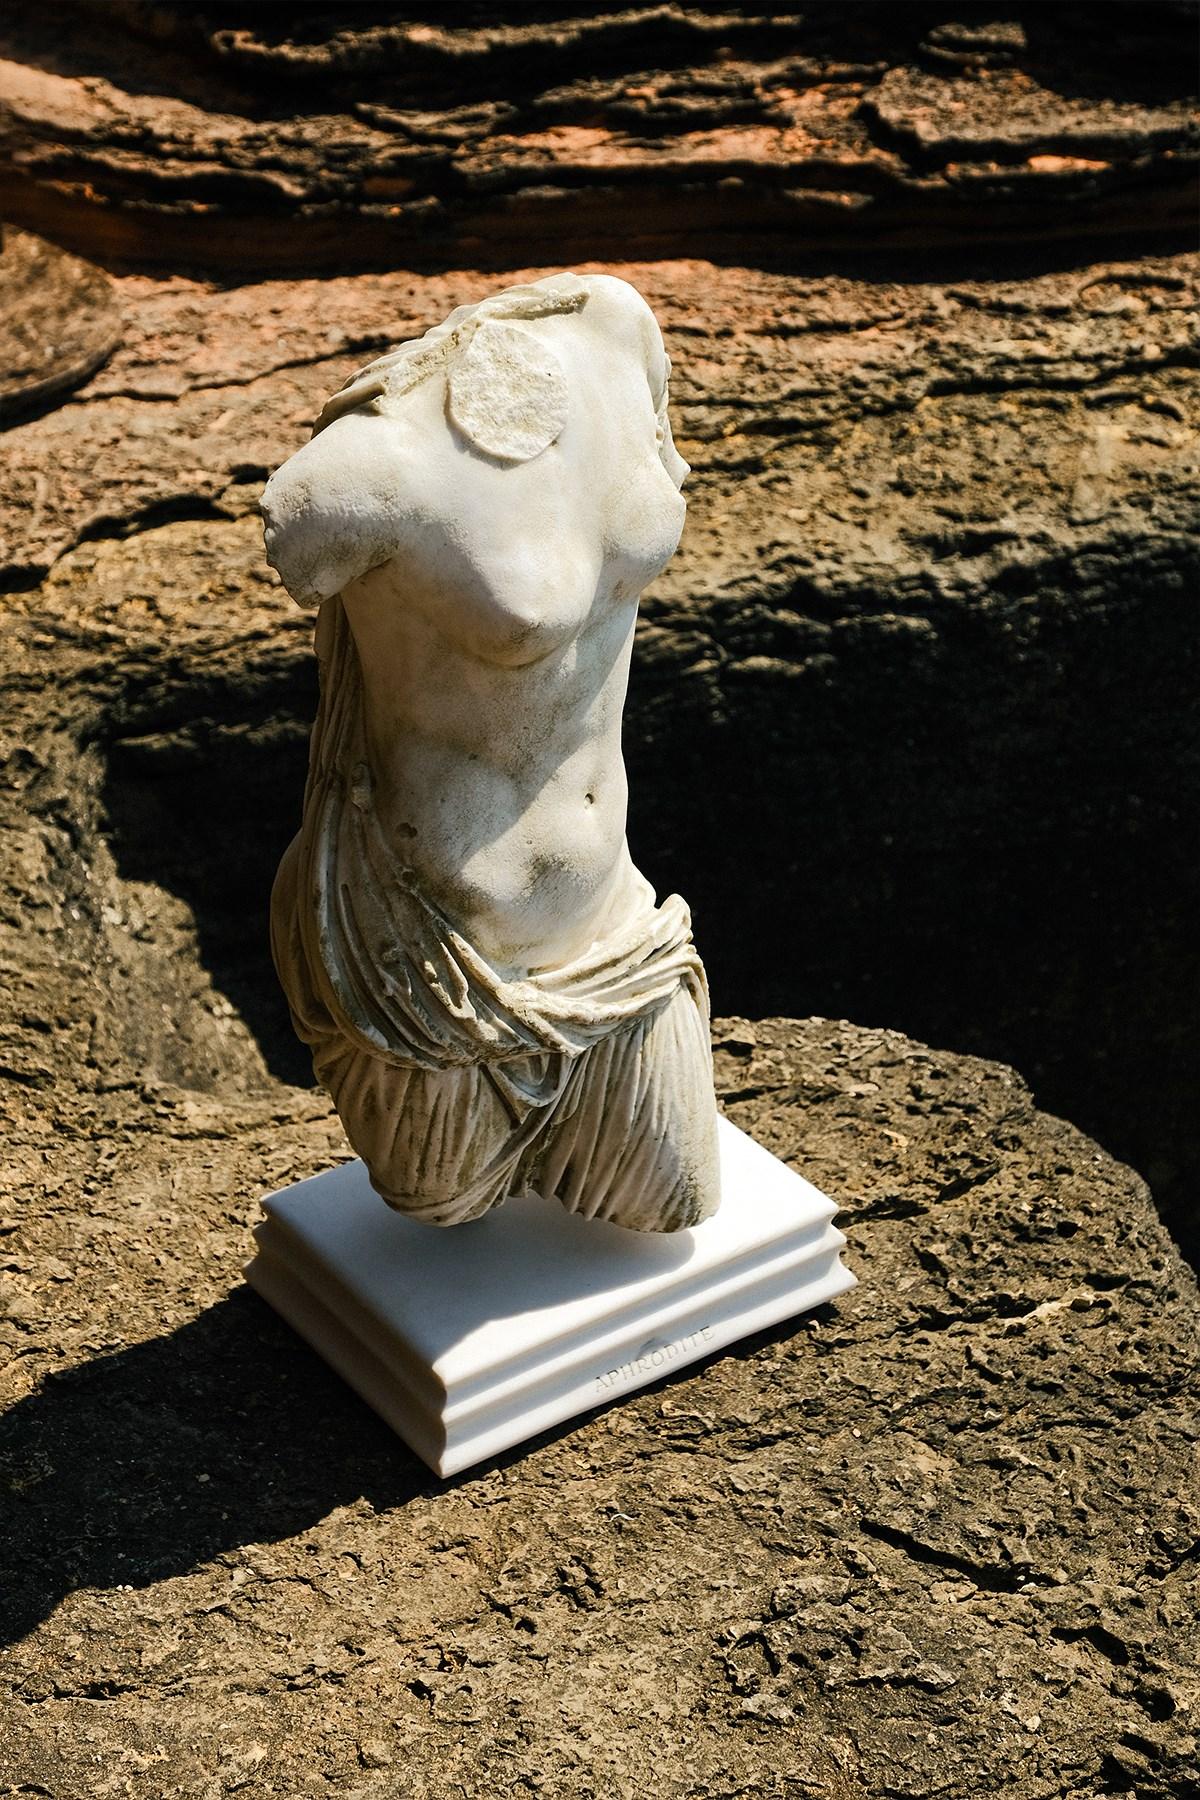 Aphrodite is known as the goddess of love and beauty from Greek mythology. In Roman mythology she is called Venus. The original is displayed in the Ephesus Museum.
Lagu's special selection carries the most important sculptures in world history to